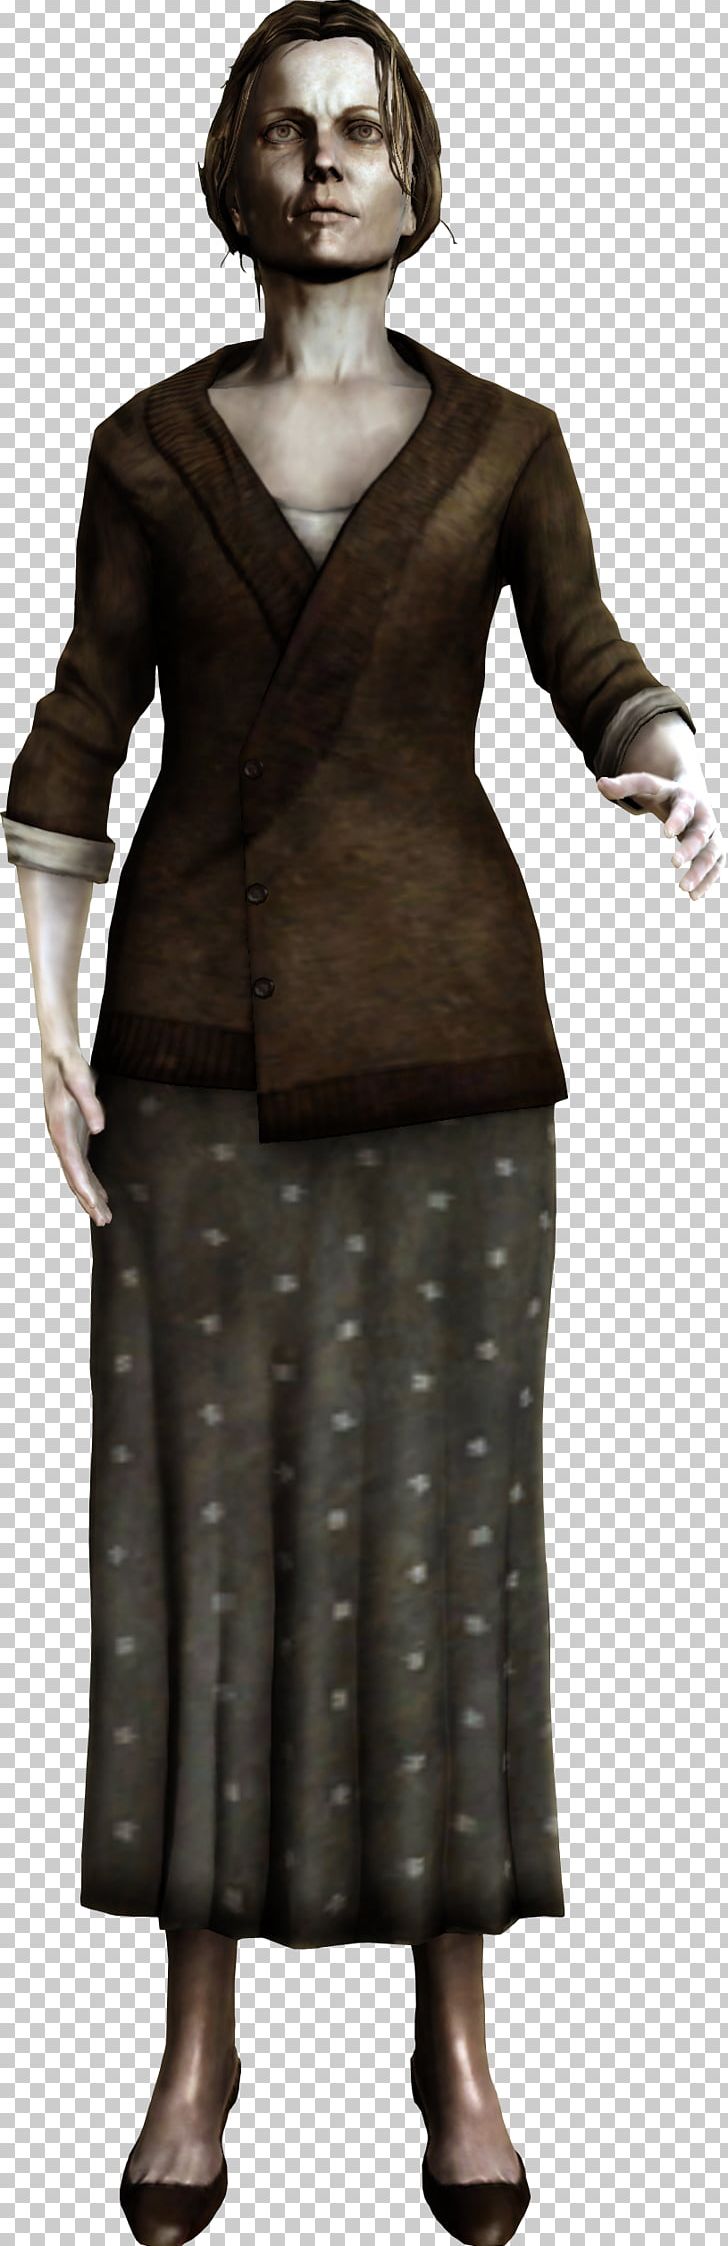 Silent Hill: Homecoming Shepherd's Glen Character Survival Horror Protagonist PNG, Clipart, Character, Costume, Costume Design, Family, Game Free PNG Download